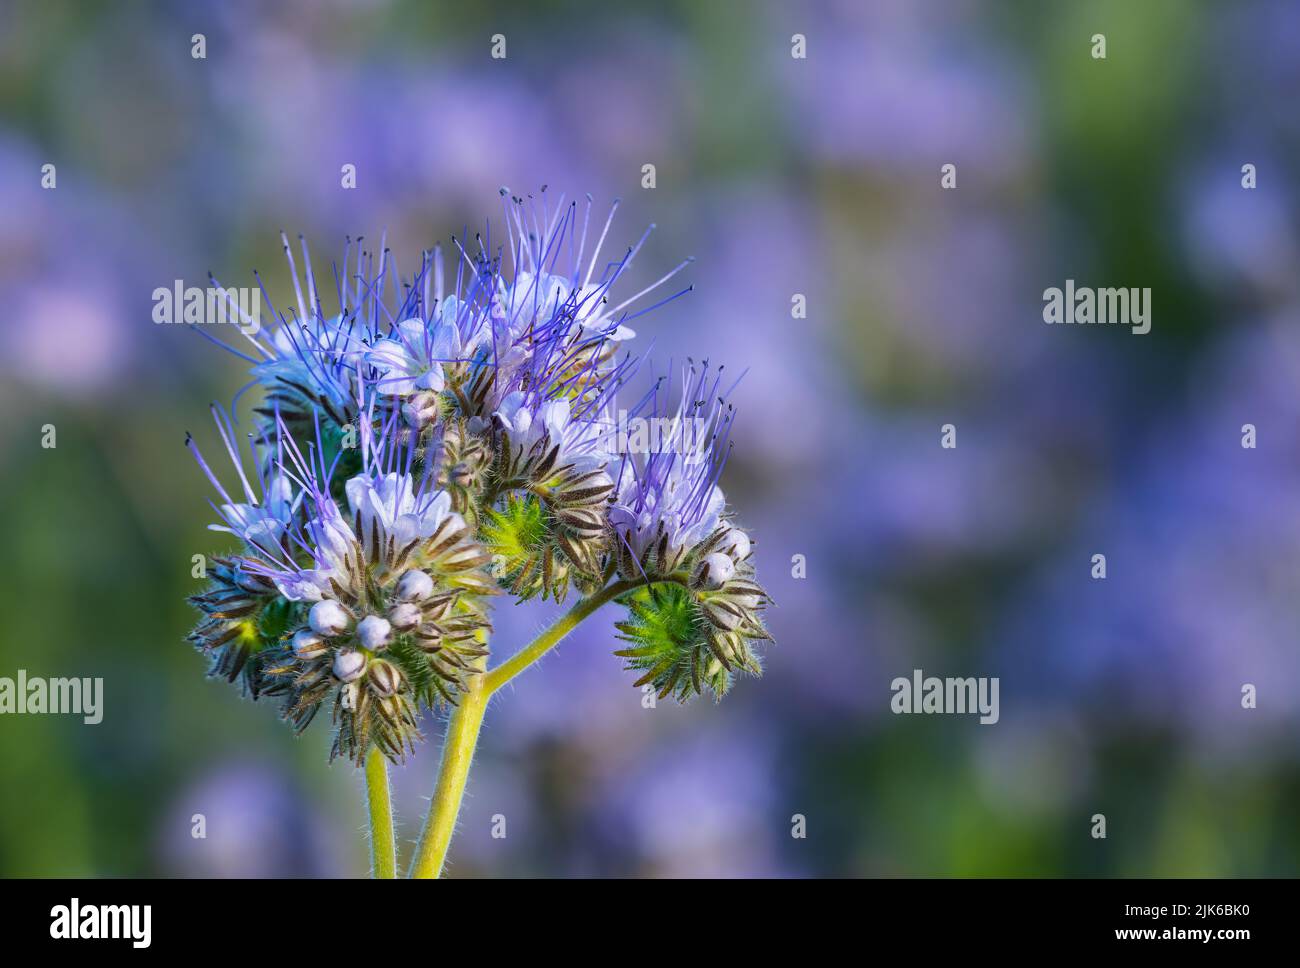 Blue tansy flowers and buds on violet green nature background. Phacelia tanacetifolia. Close-up of fragile coiling bell shaped blooms  on blurry field. Stock Photo